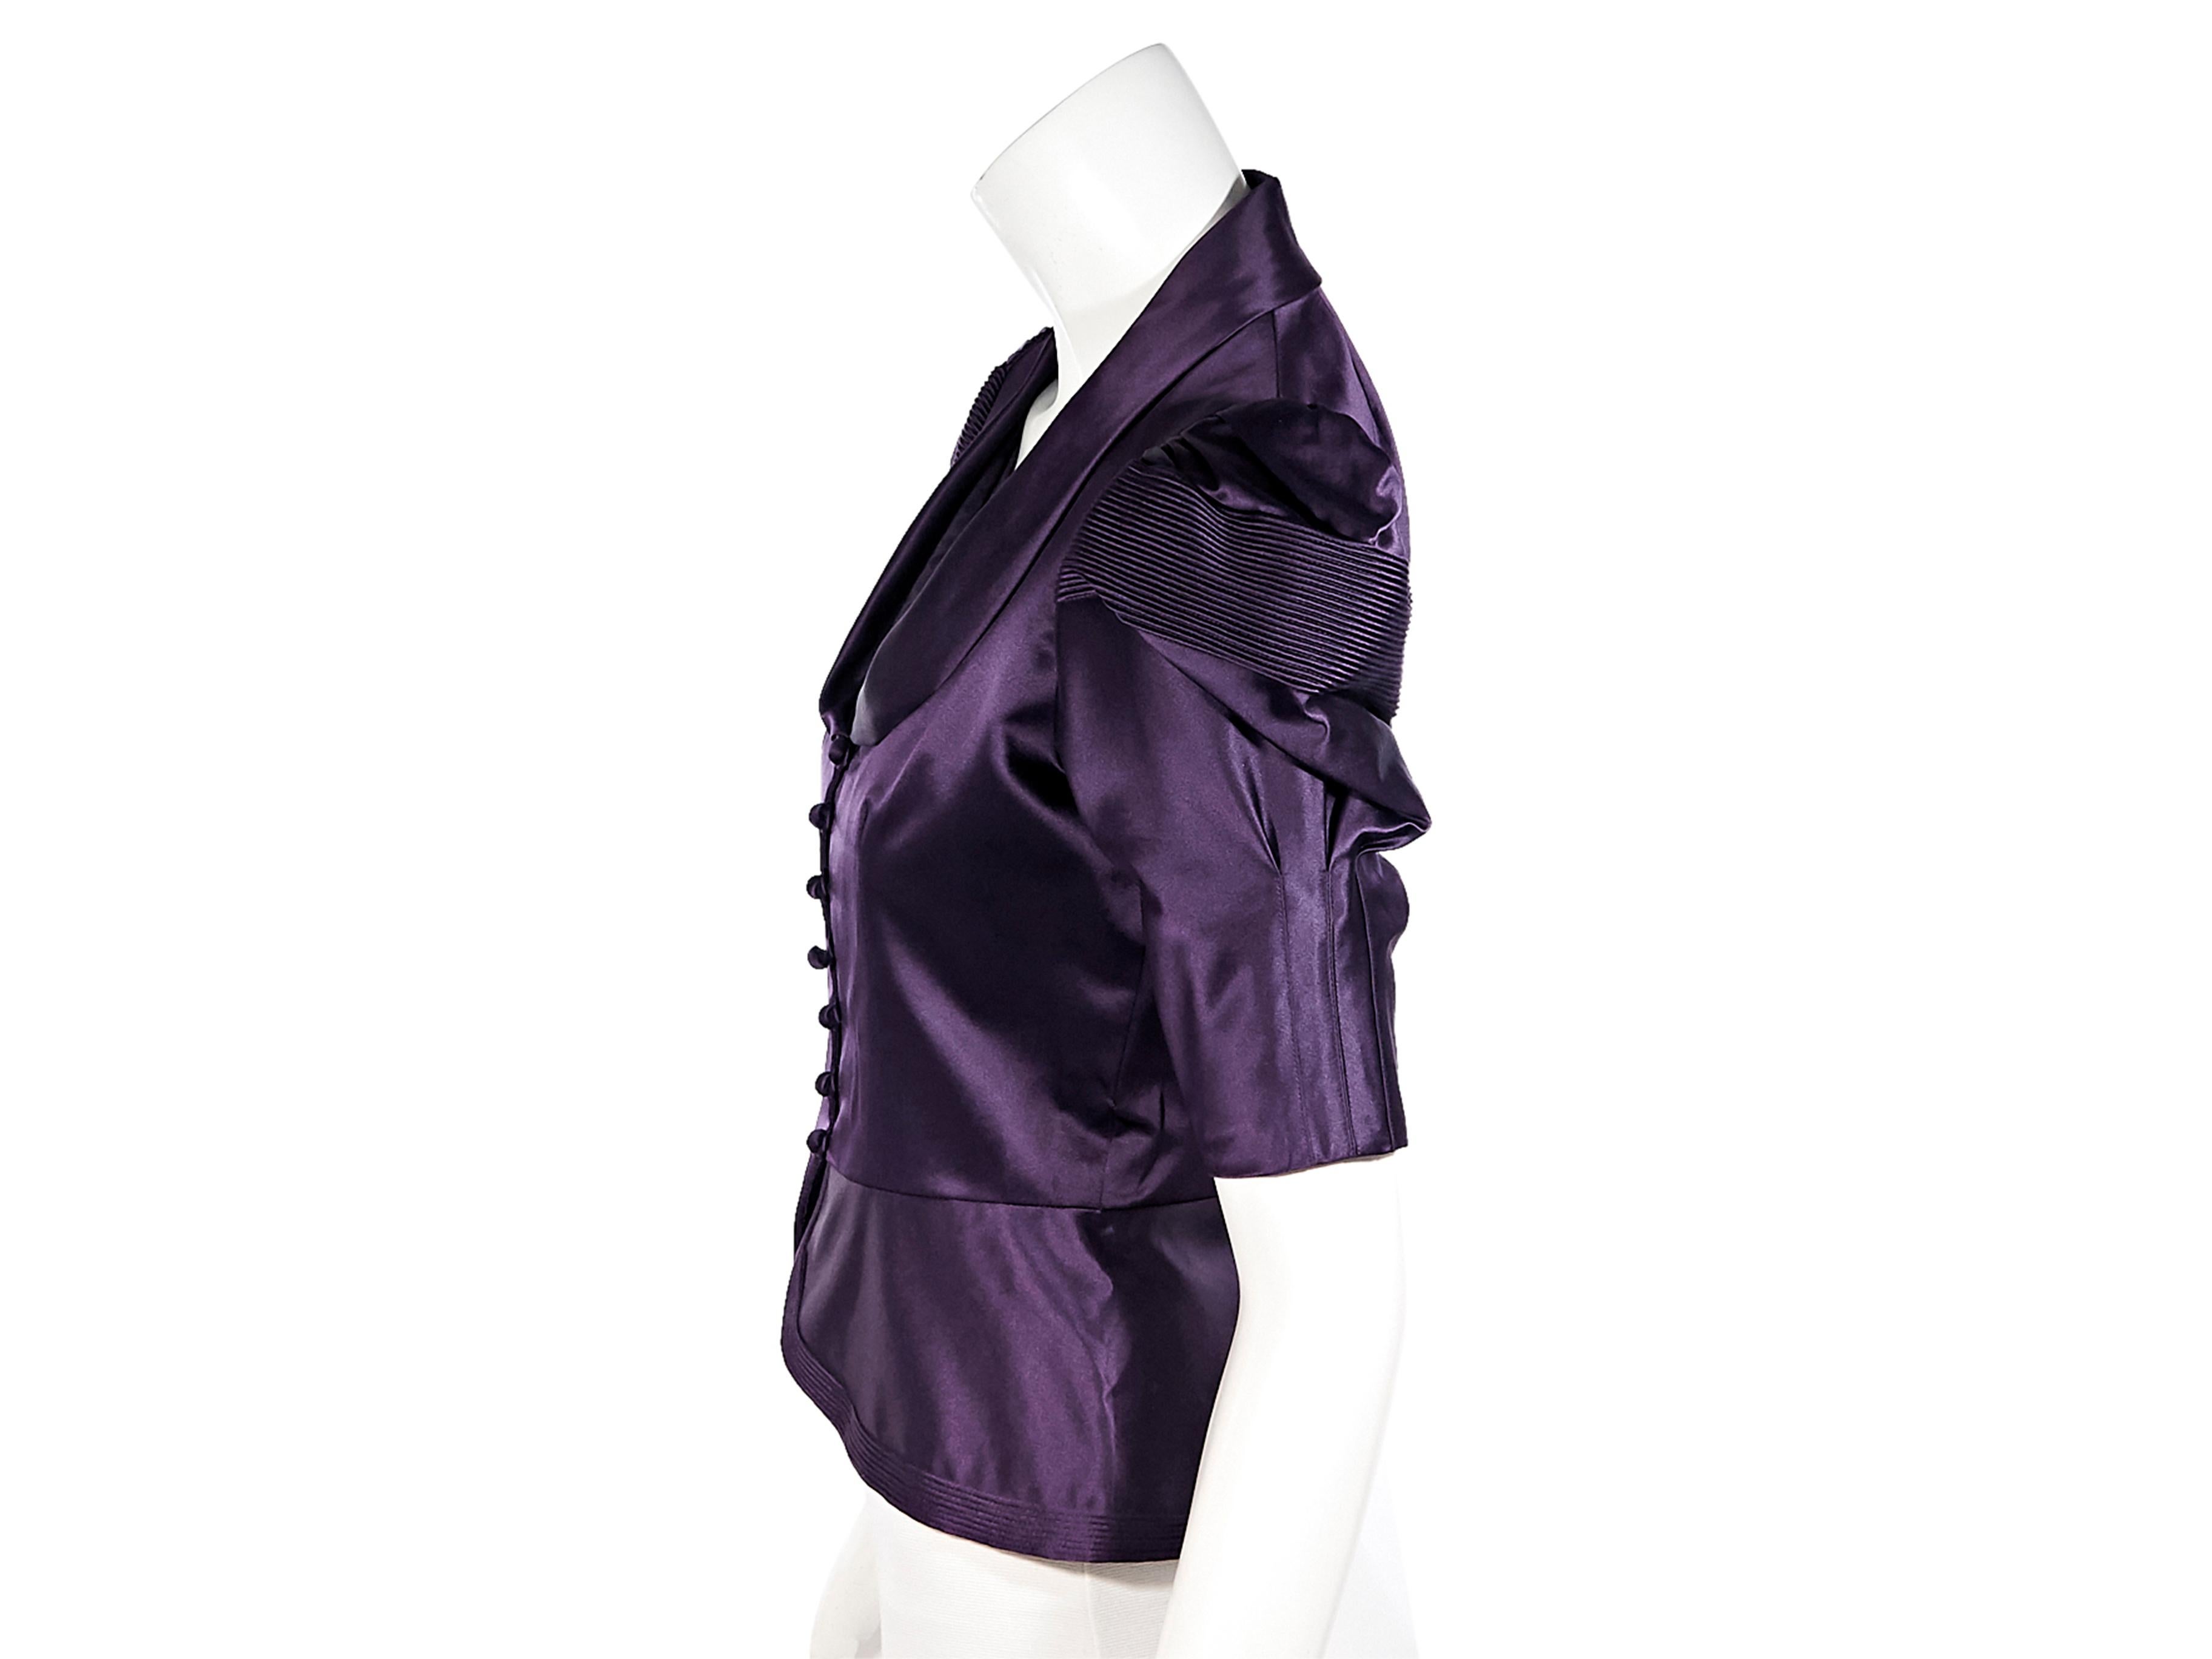 Product details:  Purple satin jacket with lace tank by Ralph Lauren Black Label. Jacket: Short sleeve. Peter pan collar. Button front closures. Tank: Sleeveless. V-neck. Embroidered lace. Adjustable shoulder straps.  Style yours with slim-fit